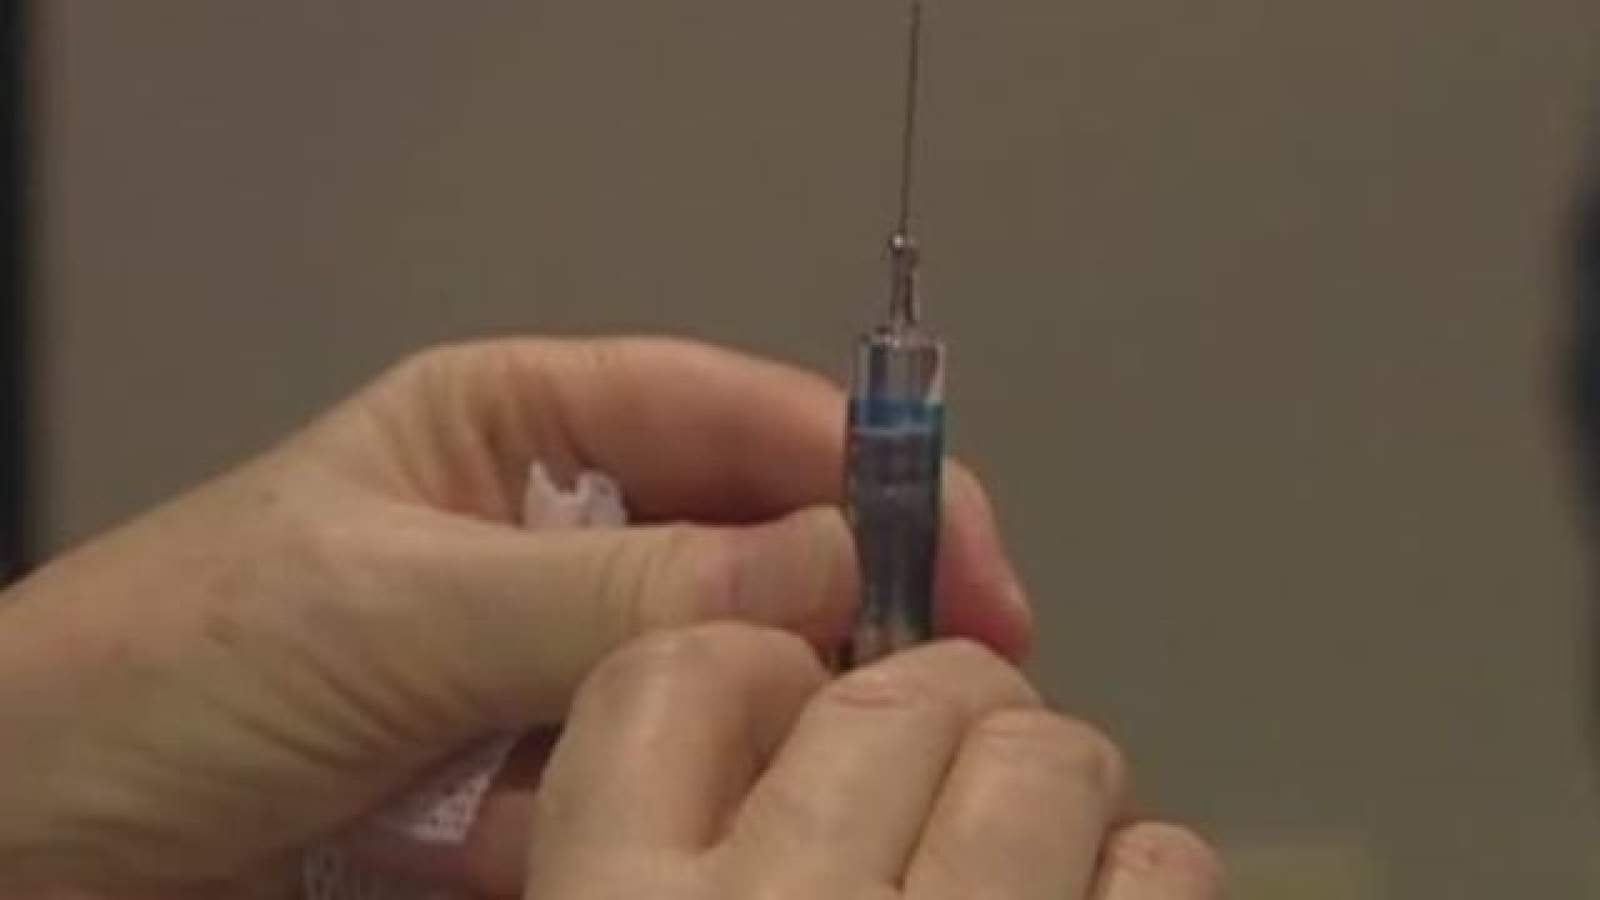 Local hospitals implement restrictions as flu cases rise